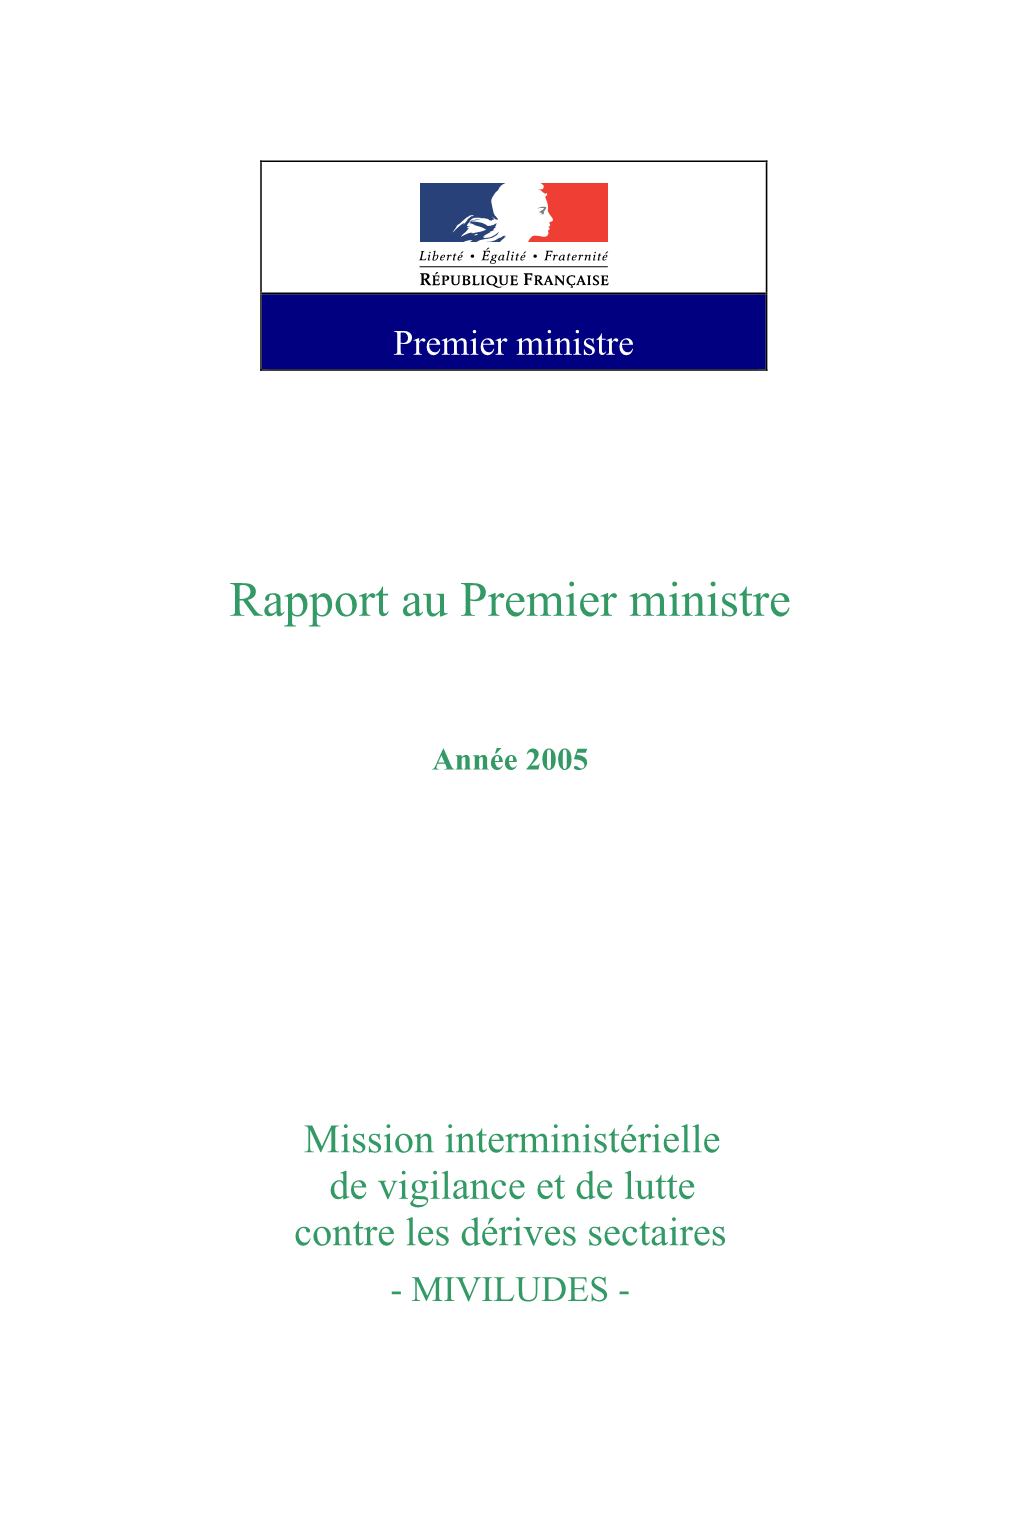 MIVILUDES Rapport 2005